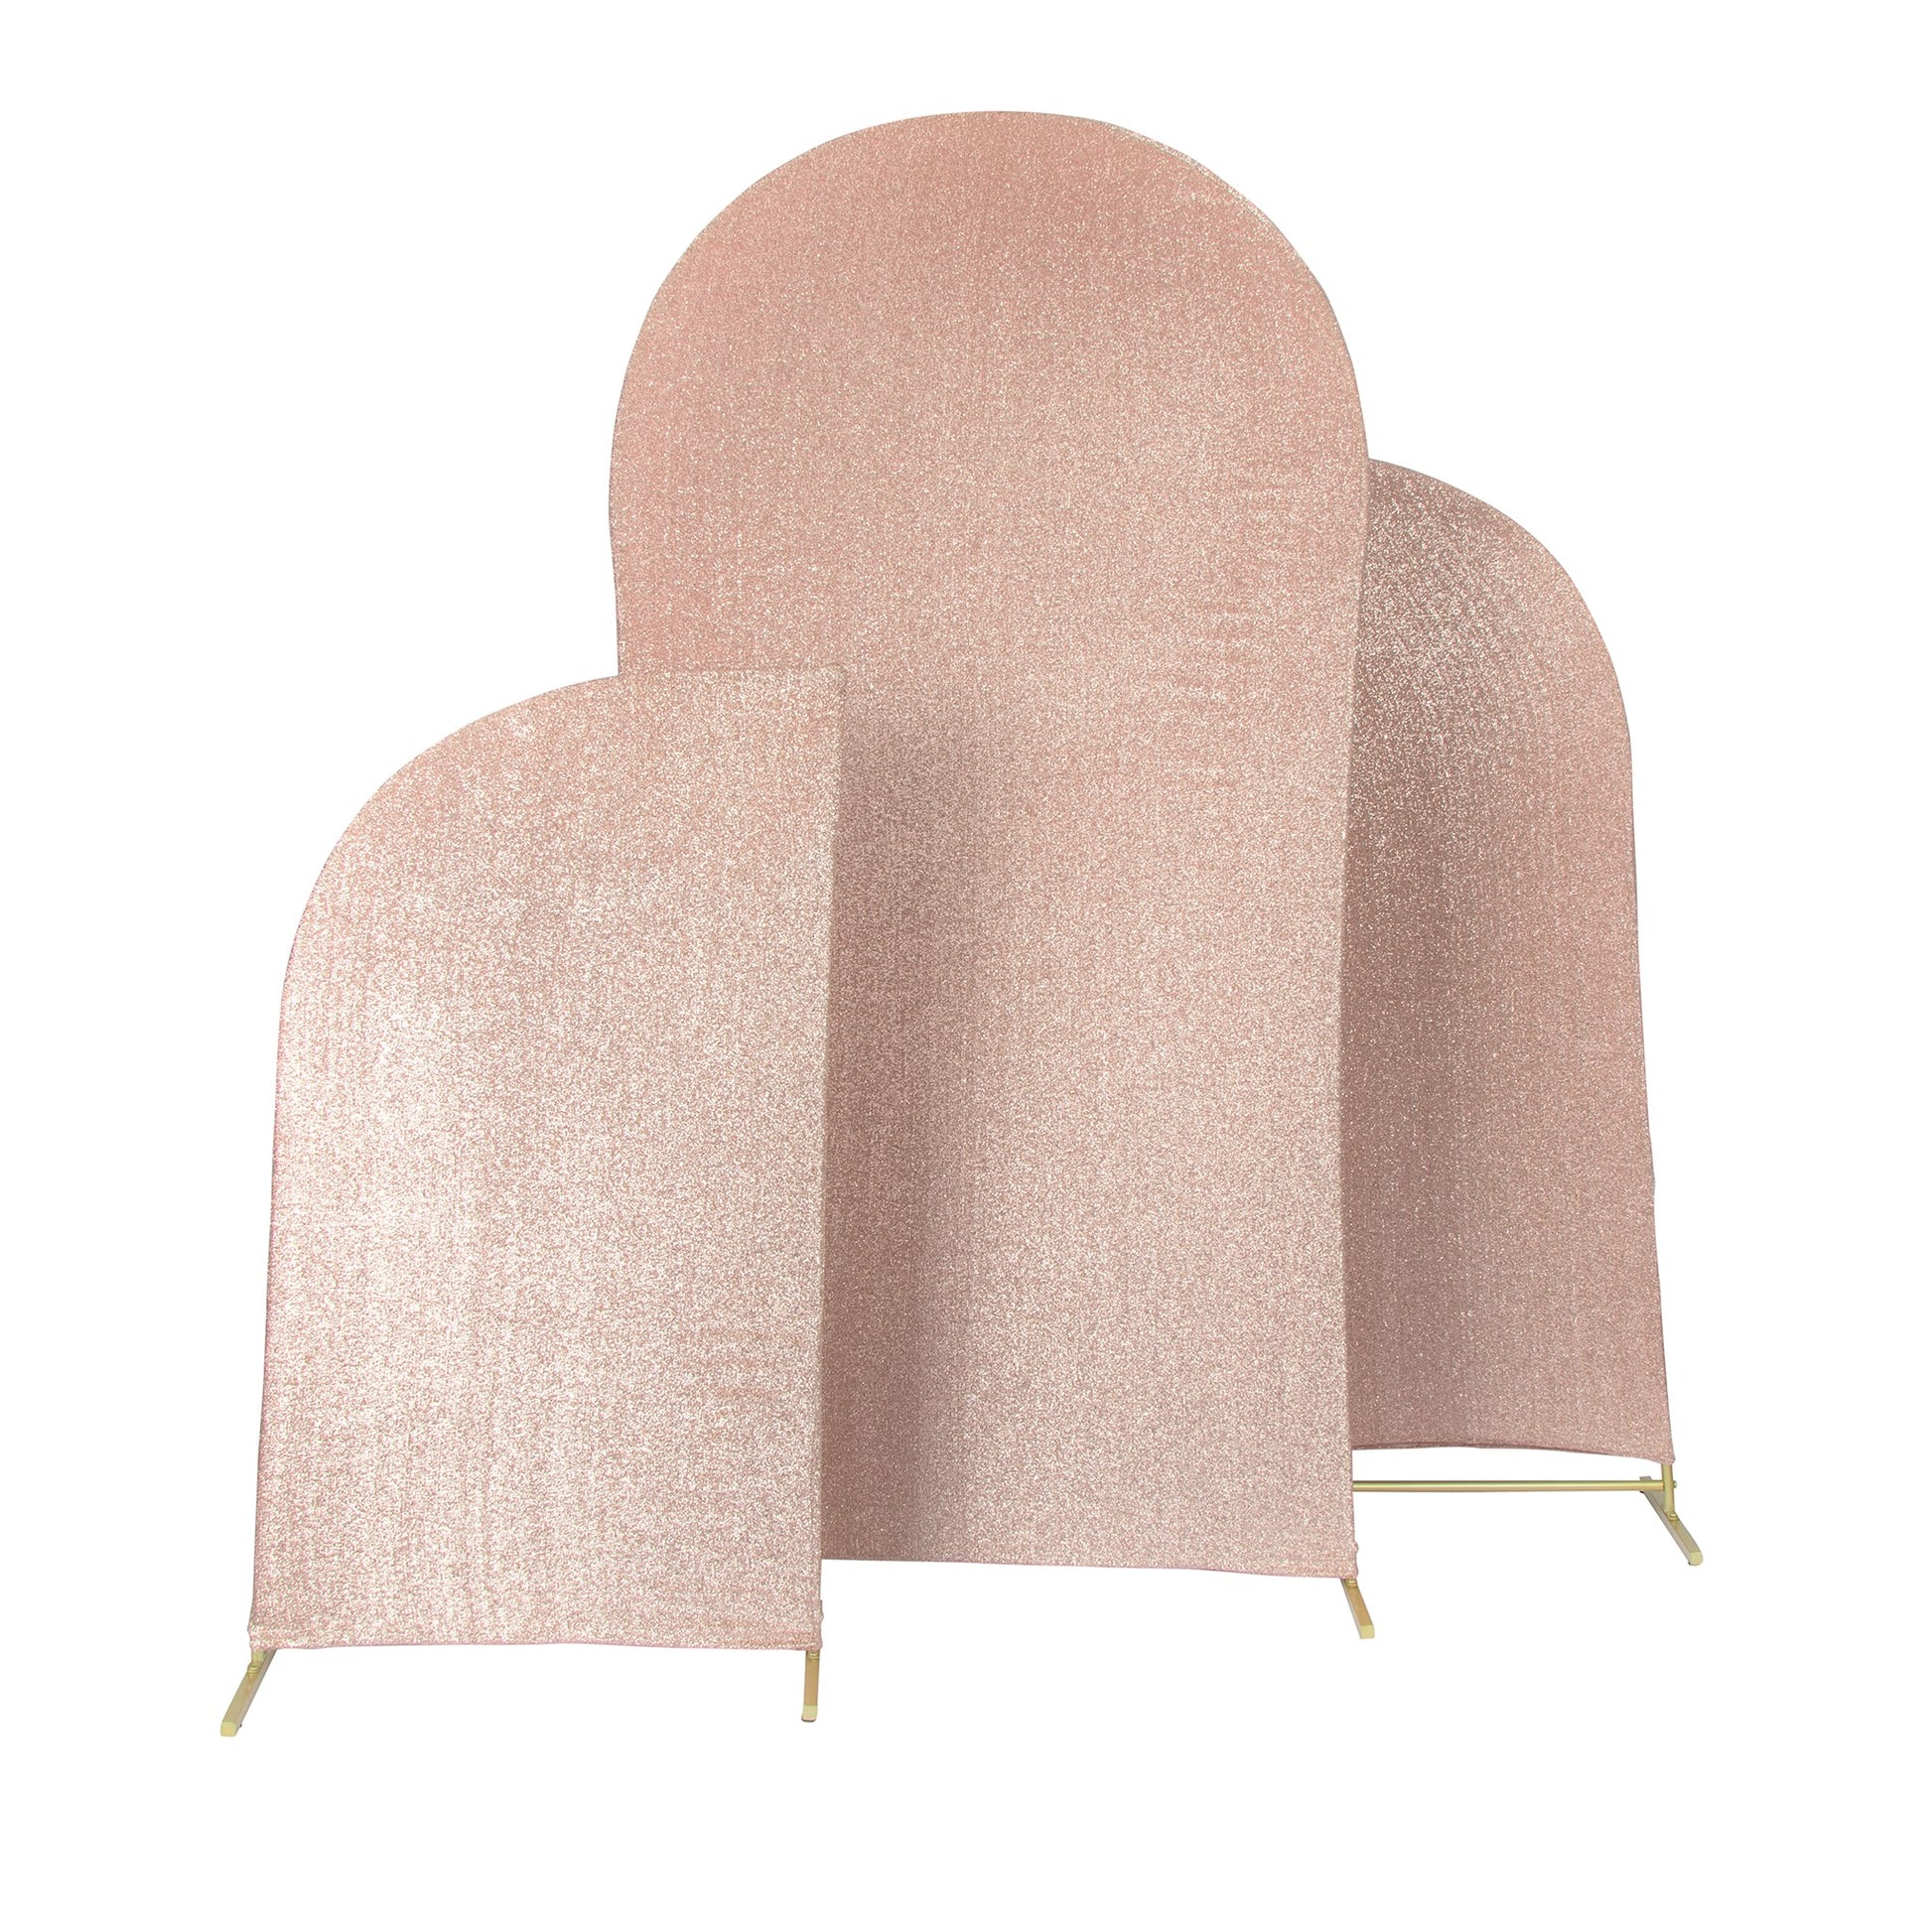 Shimmer Spandex Arch Covers for Chiara Frame Backdrop 3pc/set - Blush/Rose Gold